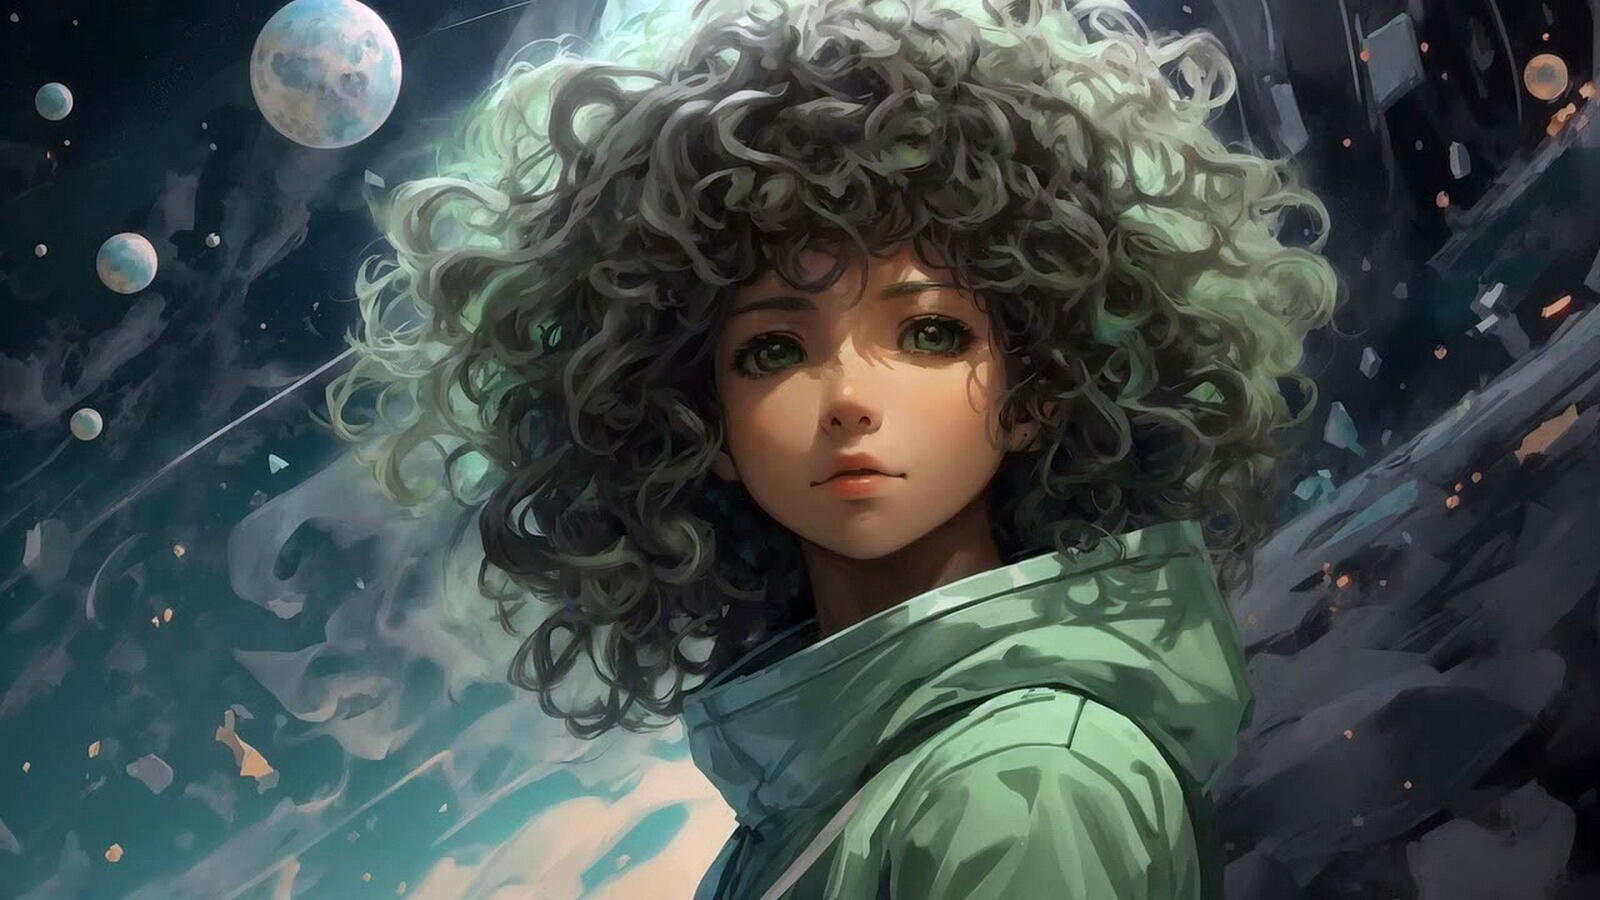 Free photo A drawing of a girl with bouffant hair and a fantasy world